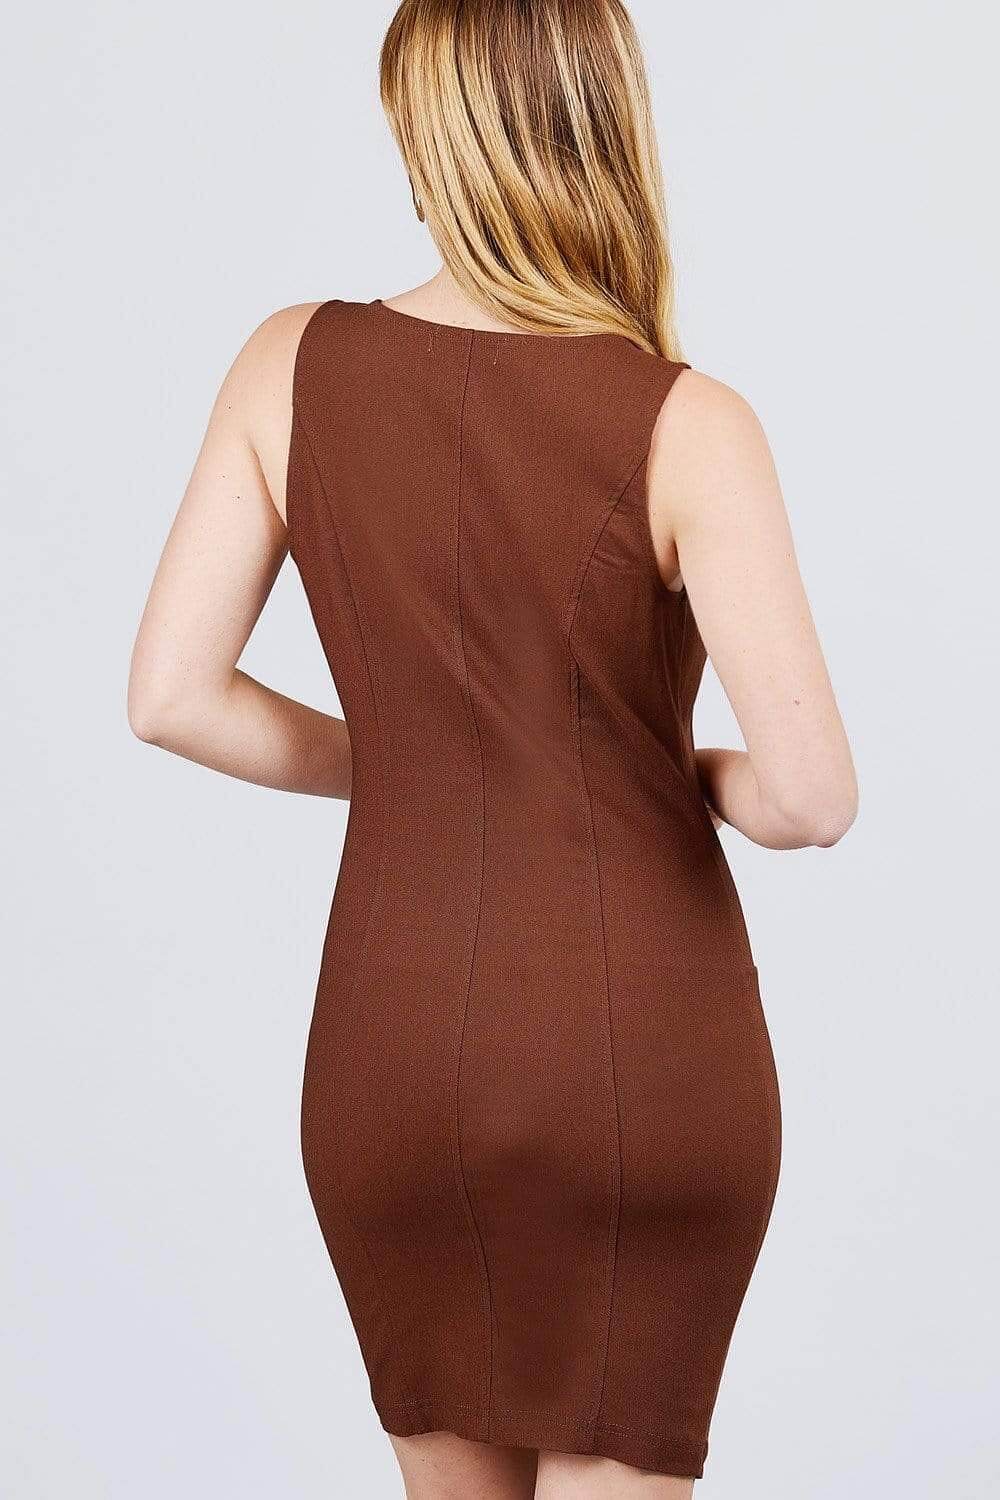 Brown Sleeveless Mini Dress With Front Buttons